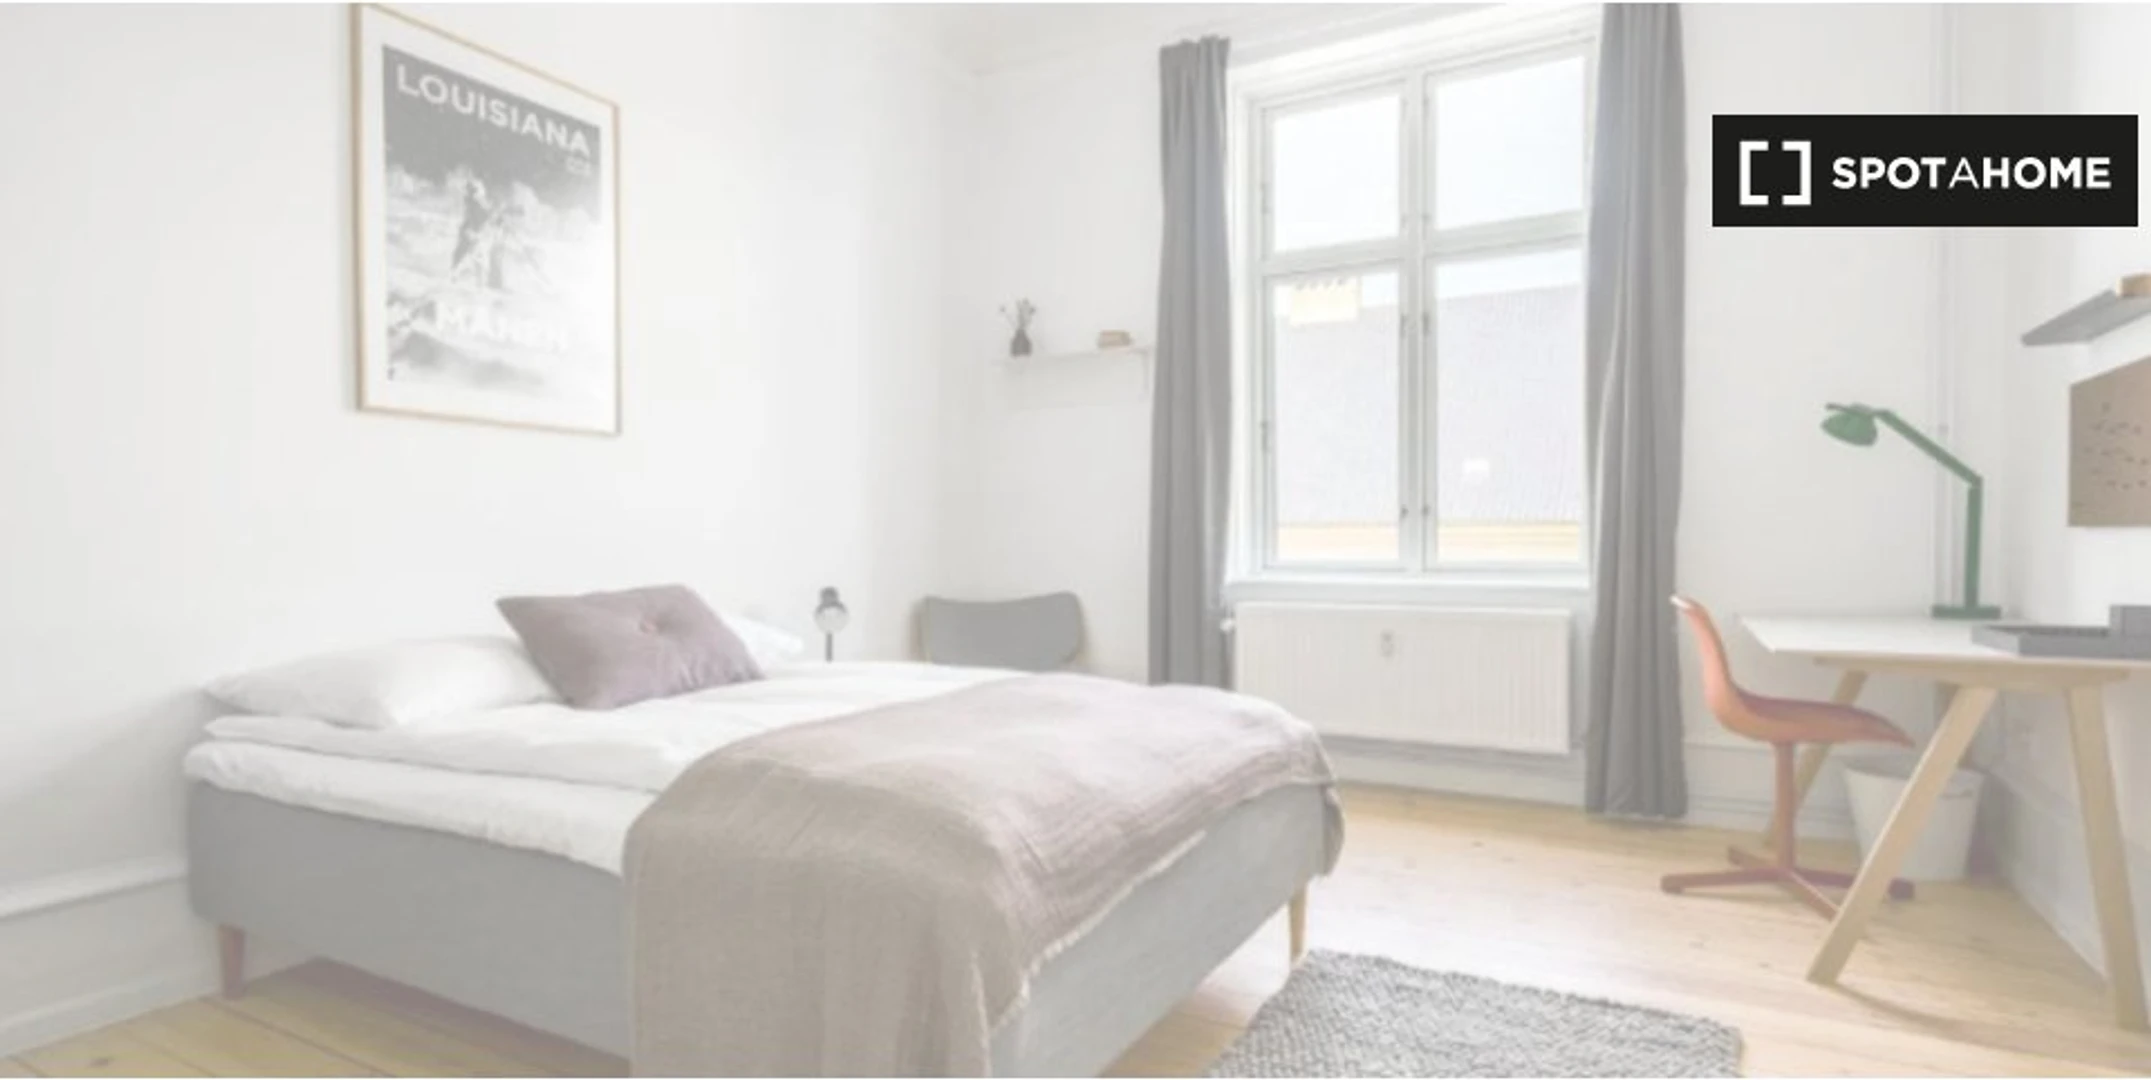 Room for rent with double bed Munich